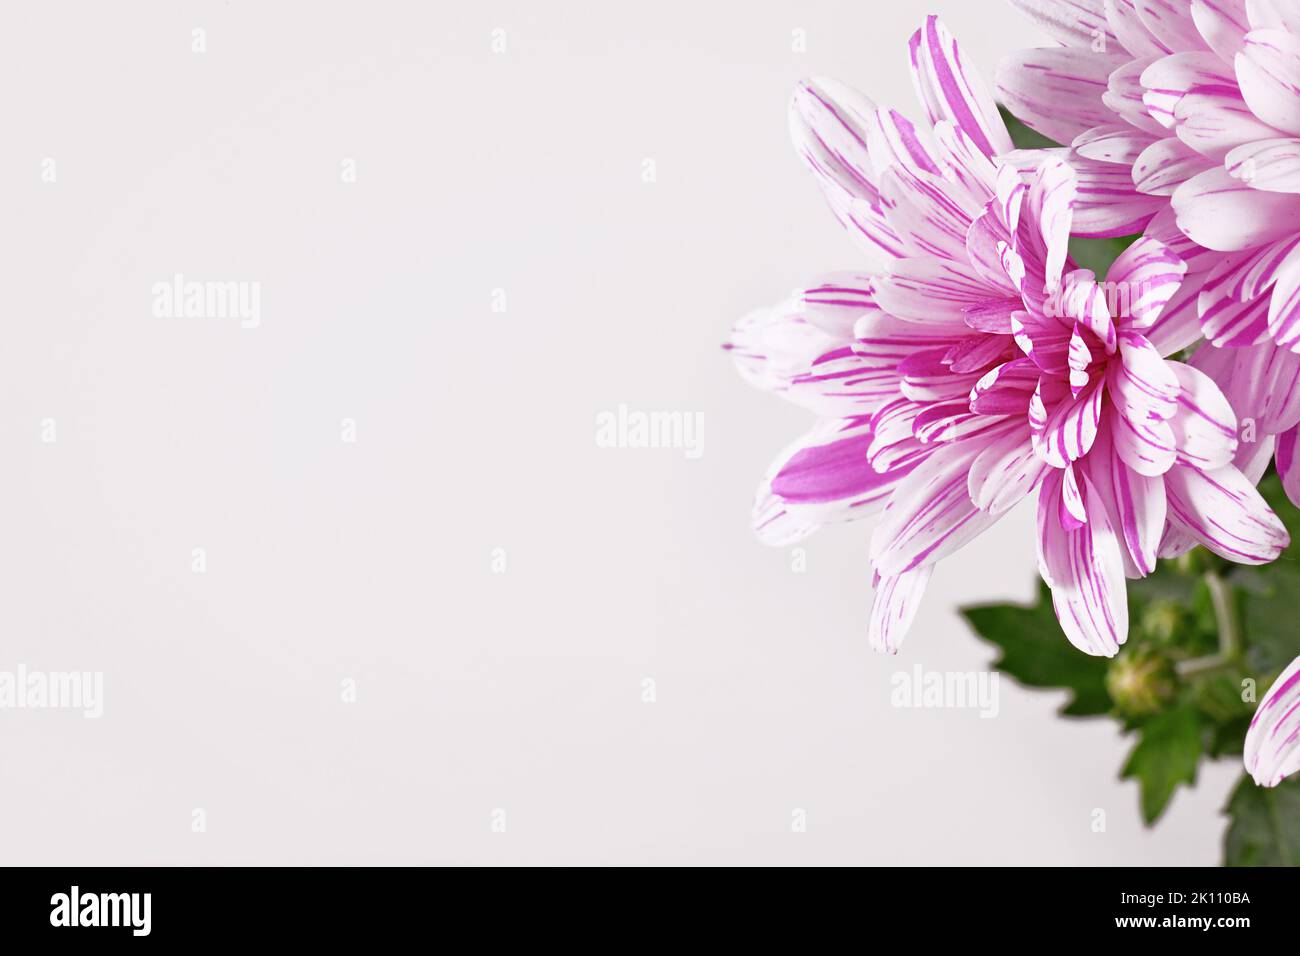 Pink and white Chrysanthemum flower on side of light gray background with copy space Stock Photo